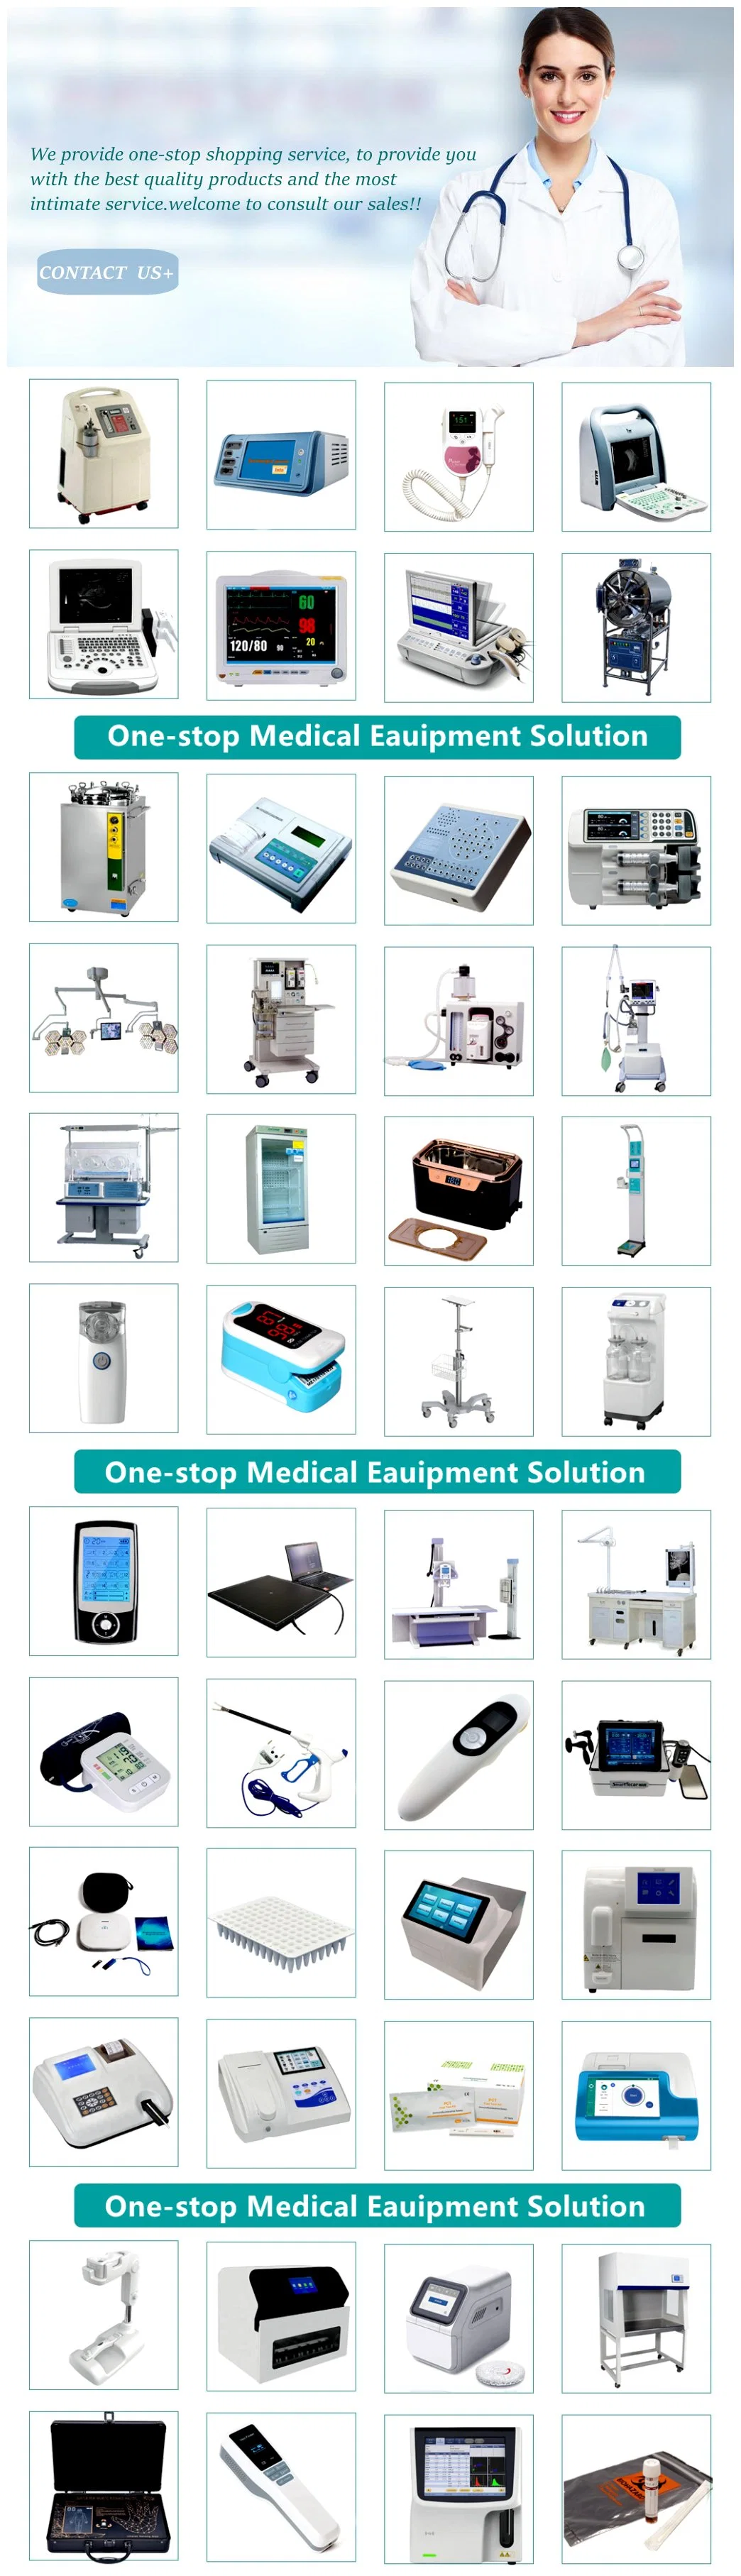 Physical Therapy Equipment Smart Tecar Wave Therapy Machines Physiotherapy Equipment Rehabilitation Therapy